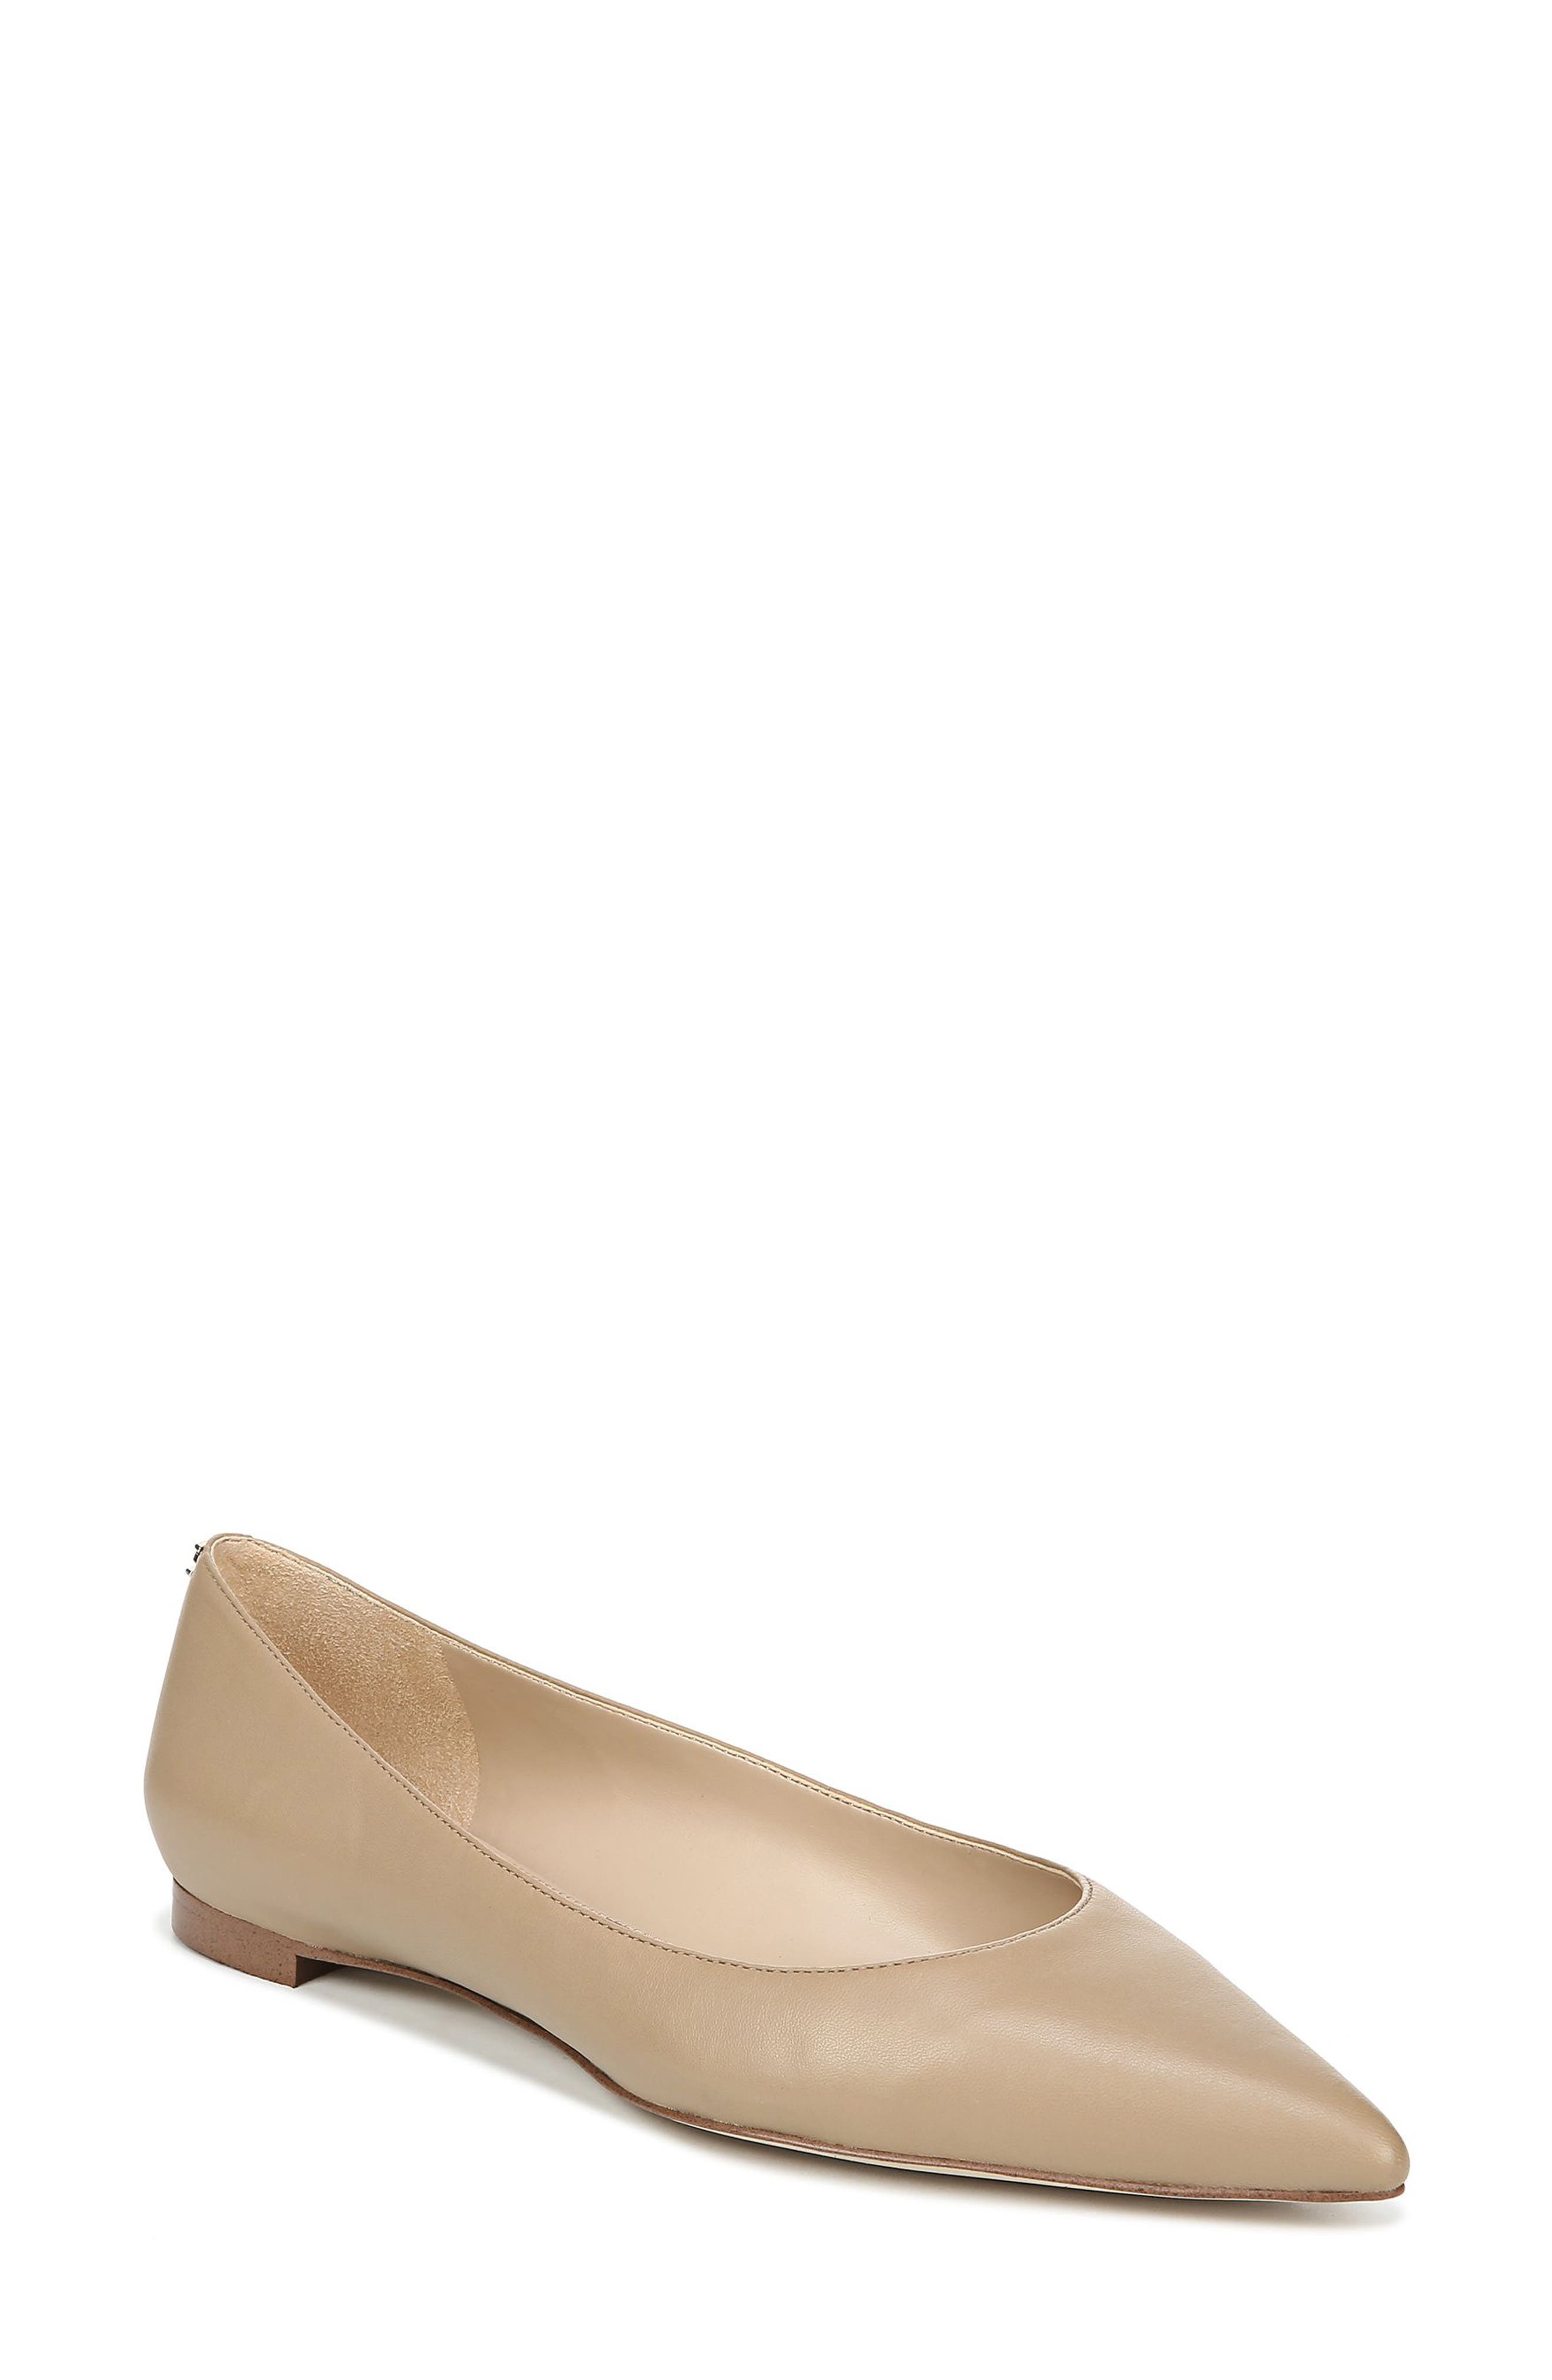 sally pointed toe flat